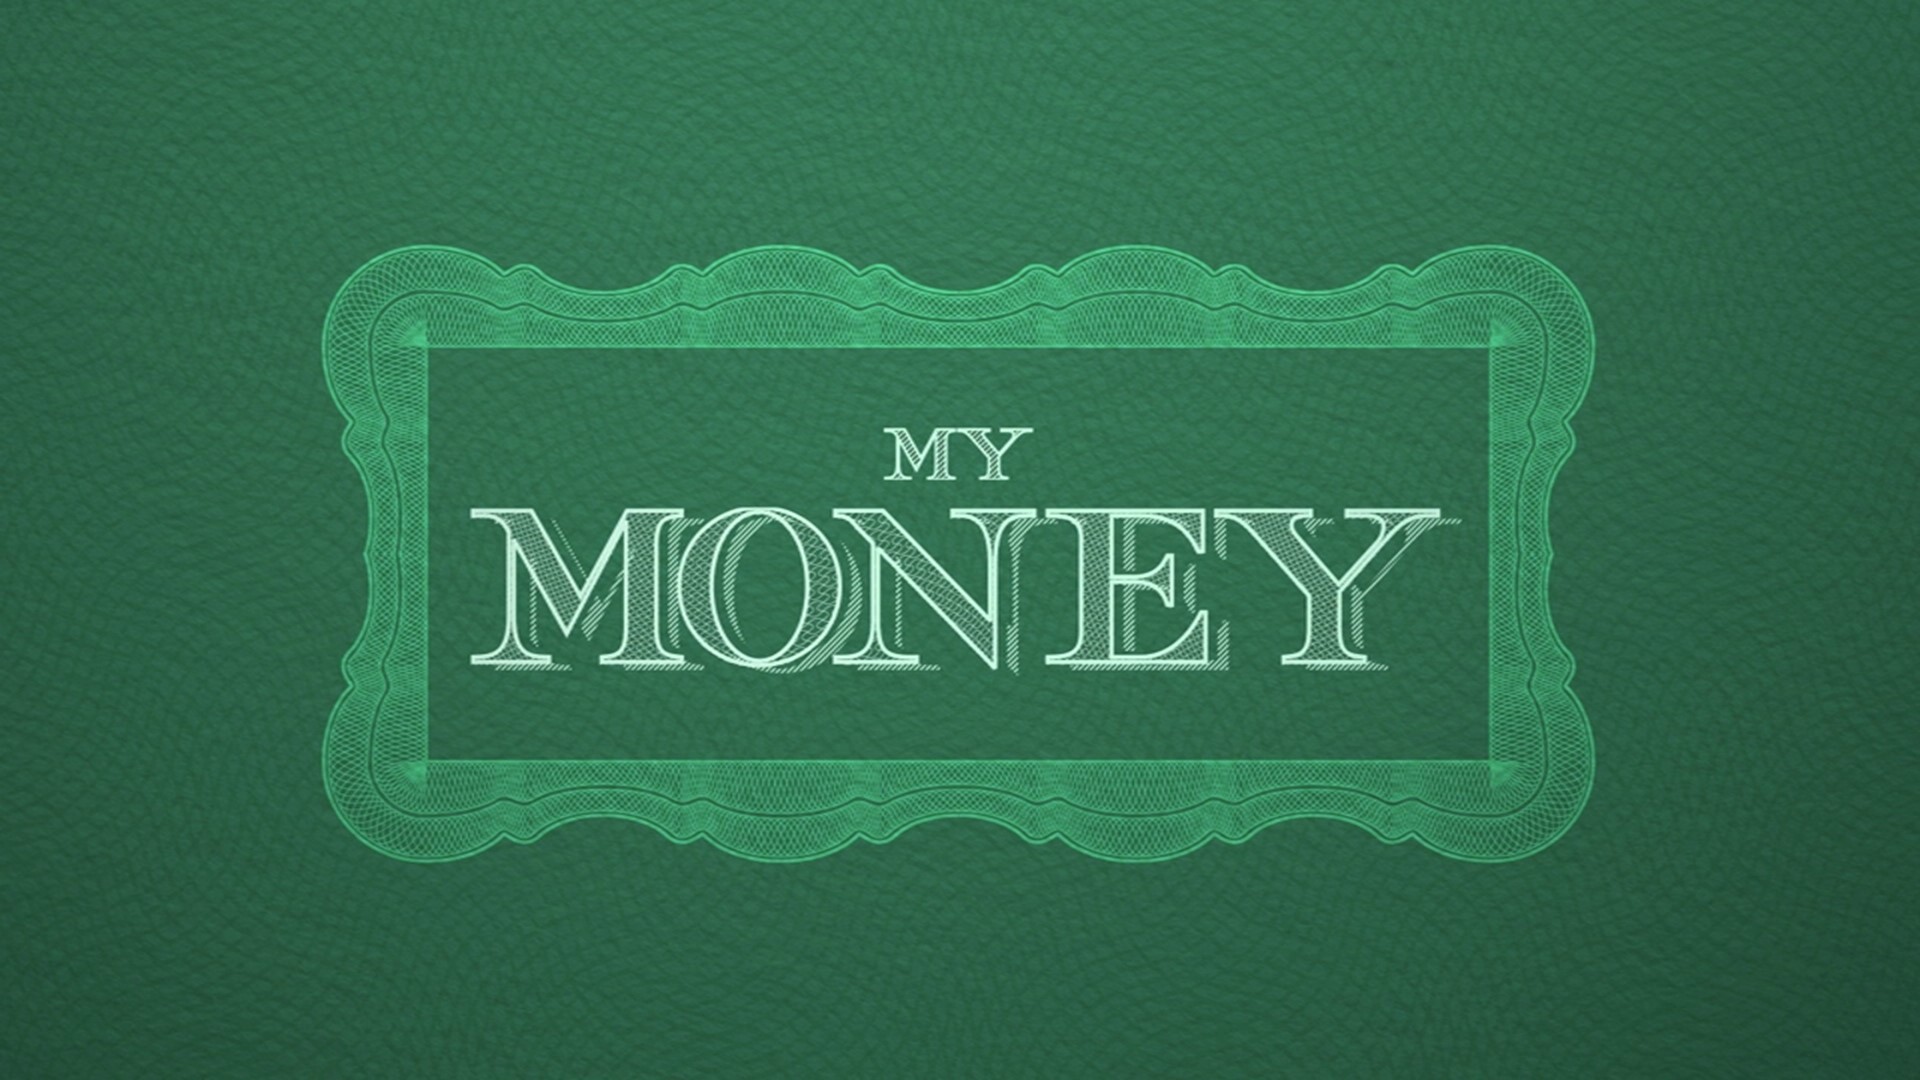 KARE 11’s Gordon Severson is teaching you how to save, spend and invest money wisely on this episode of My Money.